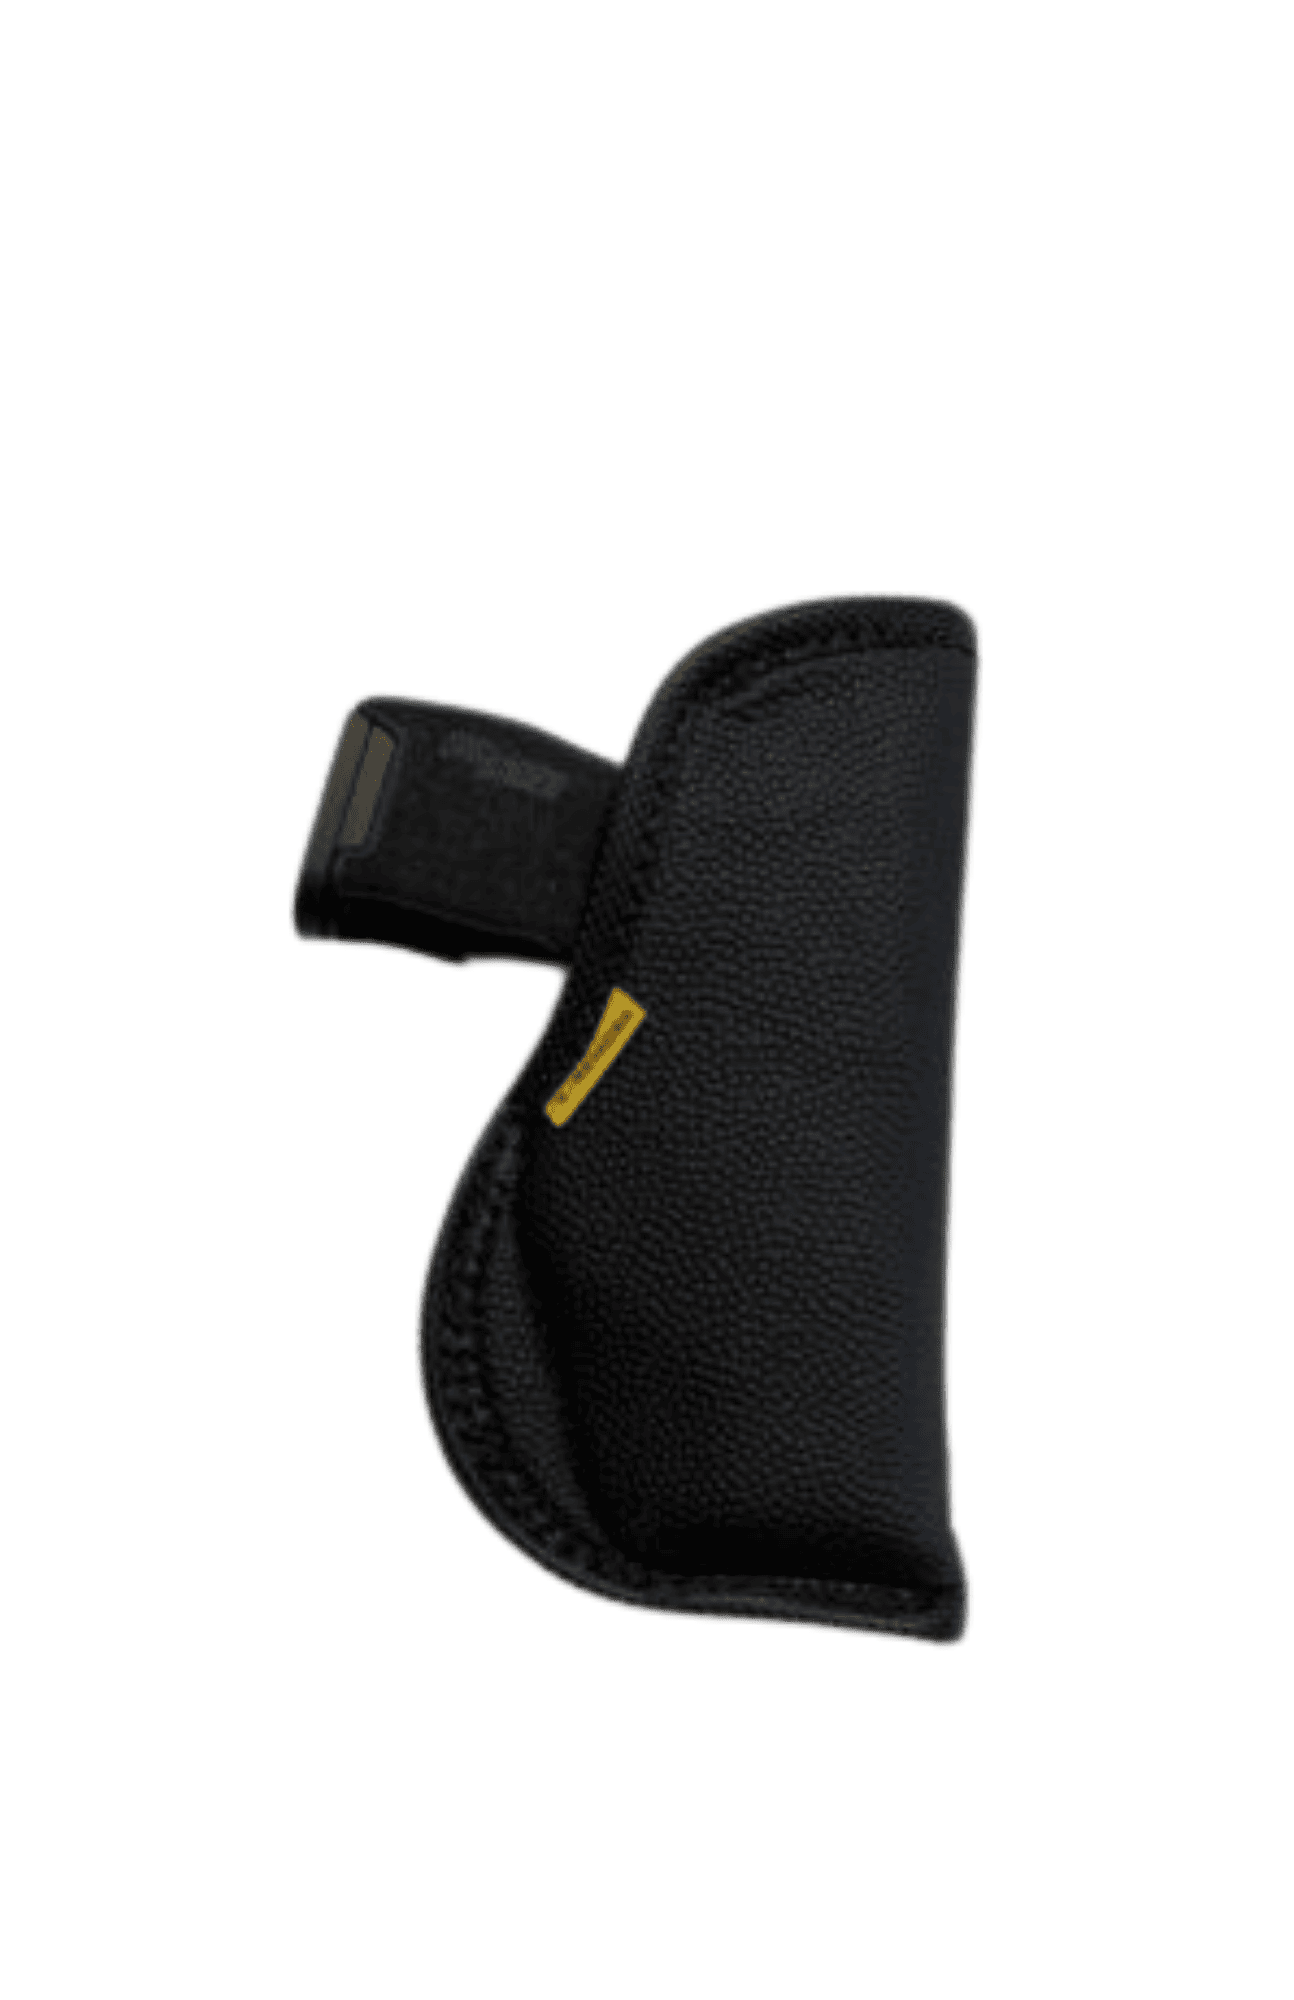 4. Different Types of Holster Sweat Shields: Which One is Right for You?